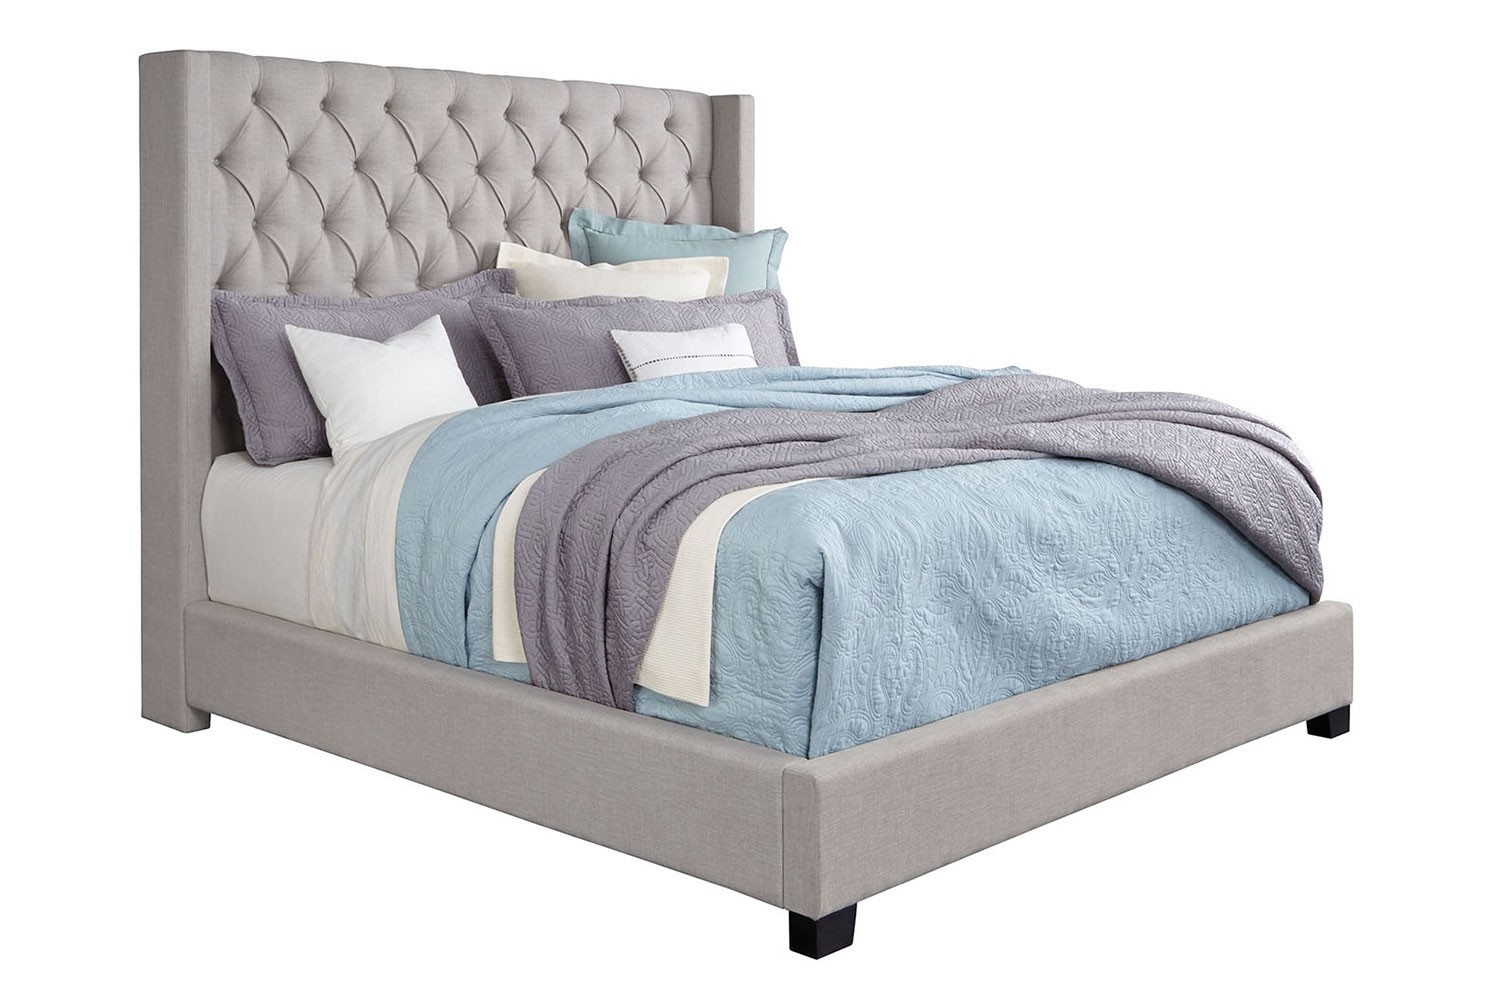 Westerly Upholstered Bed in Gray, Eastern King | Mor Furniture